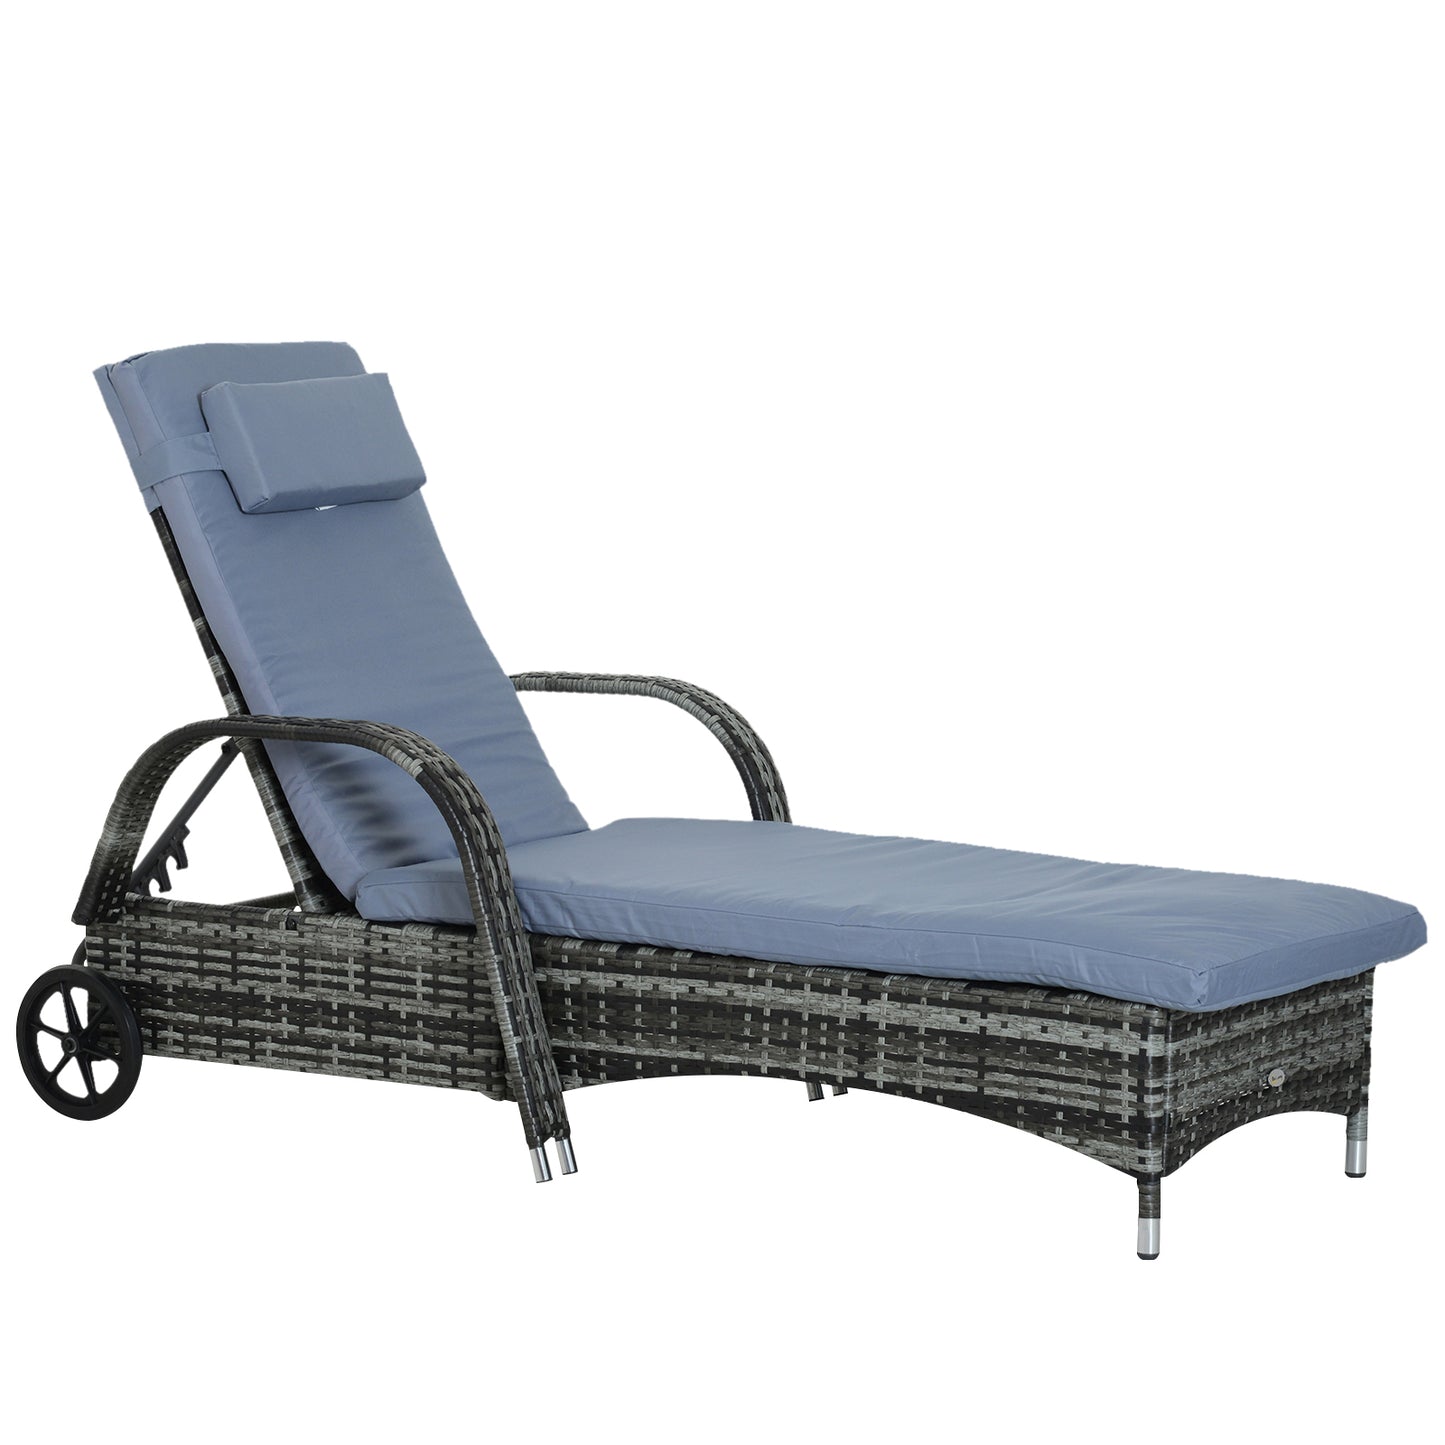 Outsunny Adjustable Rattan Sun Lounger W/ Cushion, 200Lx73Wx56-103H cm-Grey